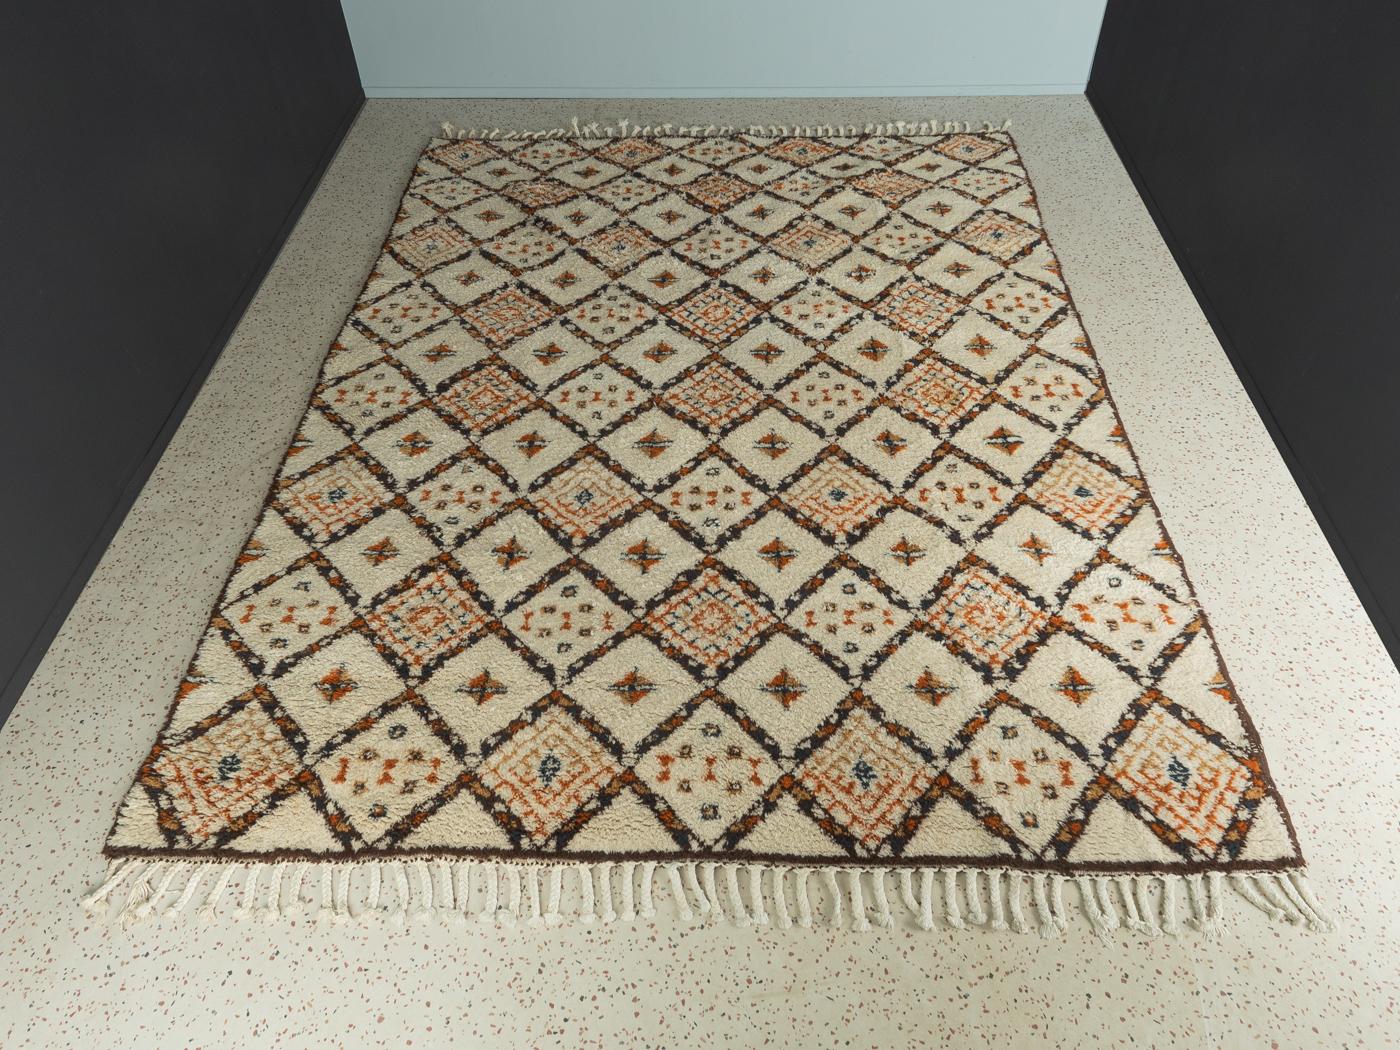 Wonderful Berber carpet from the 1960s. High-quality creamy white pile with diamond patterns in earth tones.

Quality Features:
 Berber carpet
 Hand knotted
 approx.40,000 knots per m2
 50-60 years old
 100% wool
 Made in Morocco

All of